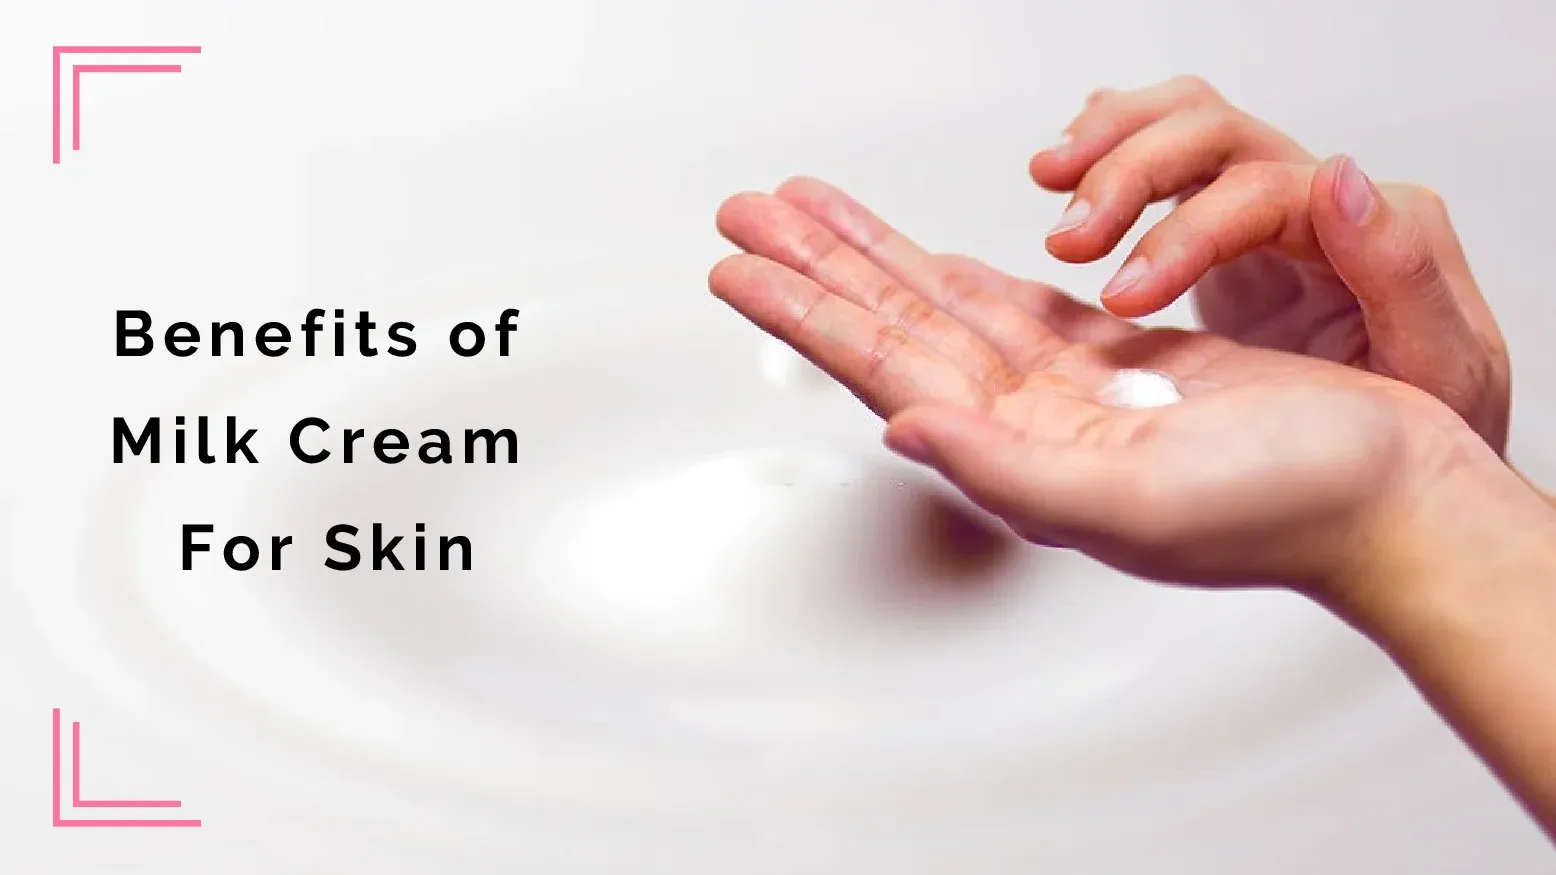 Benefits of Milk Cream for Skin and Face